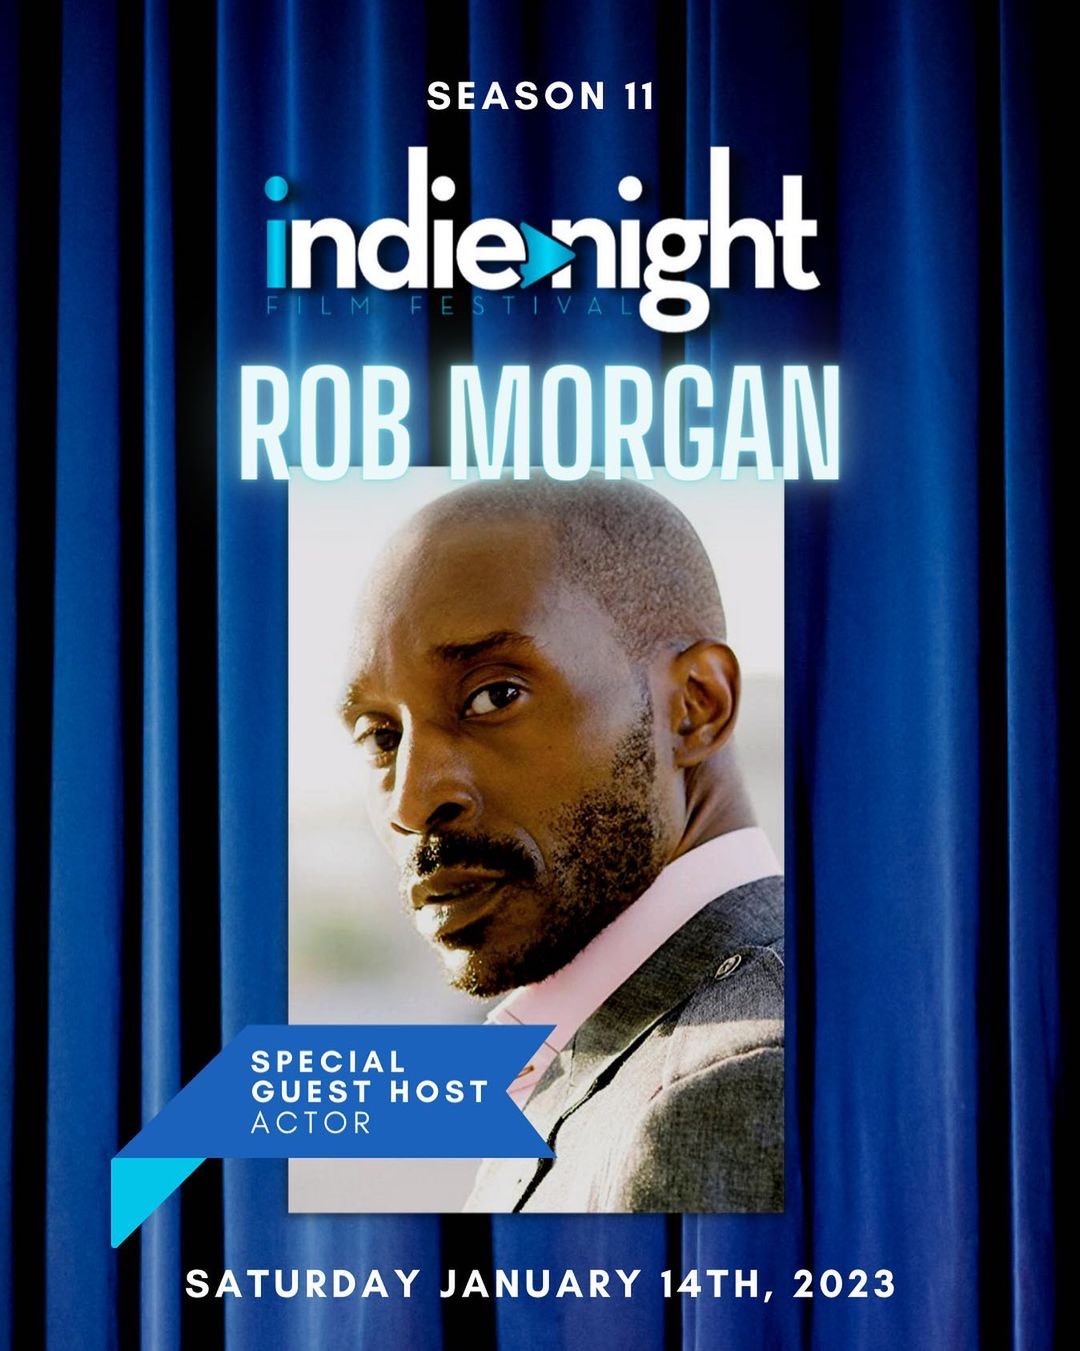 Notable actor Rob Morgan to host first Indie Night Film Festival of 2023 at the TCL Chinese Theatre